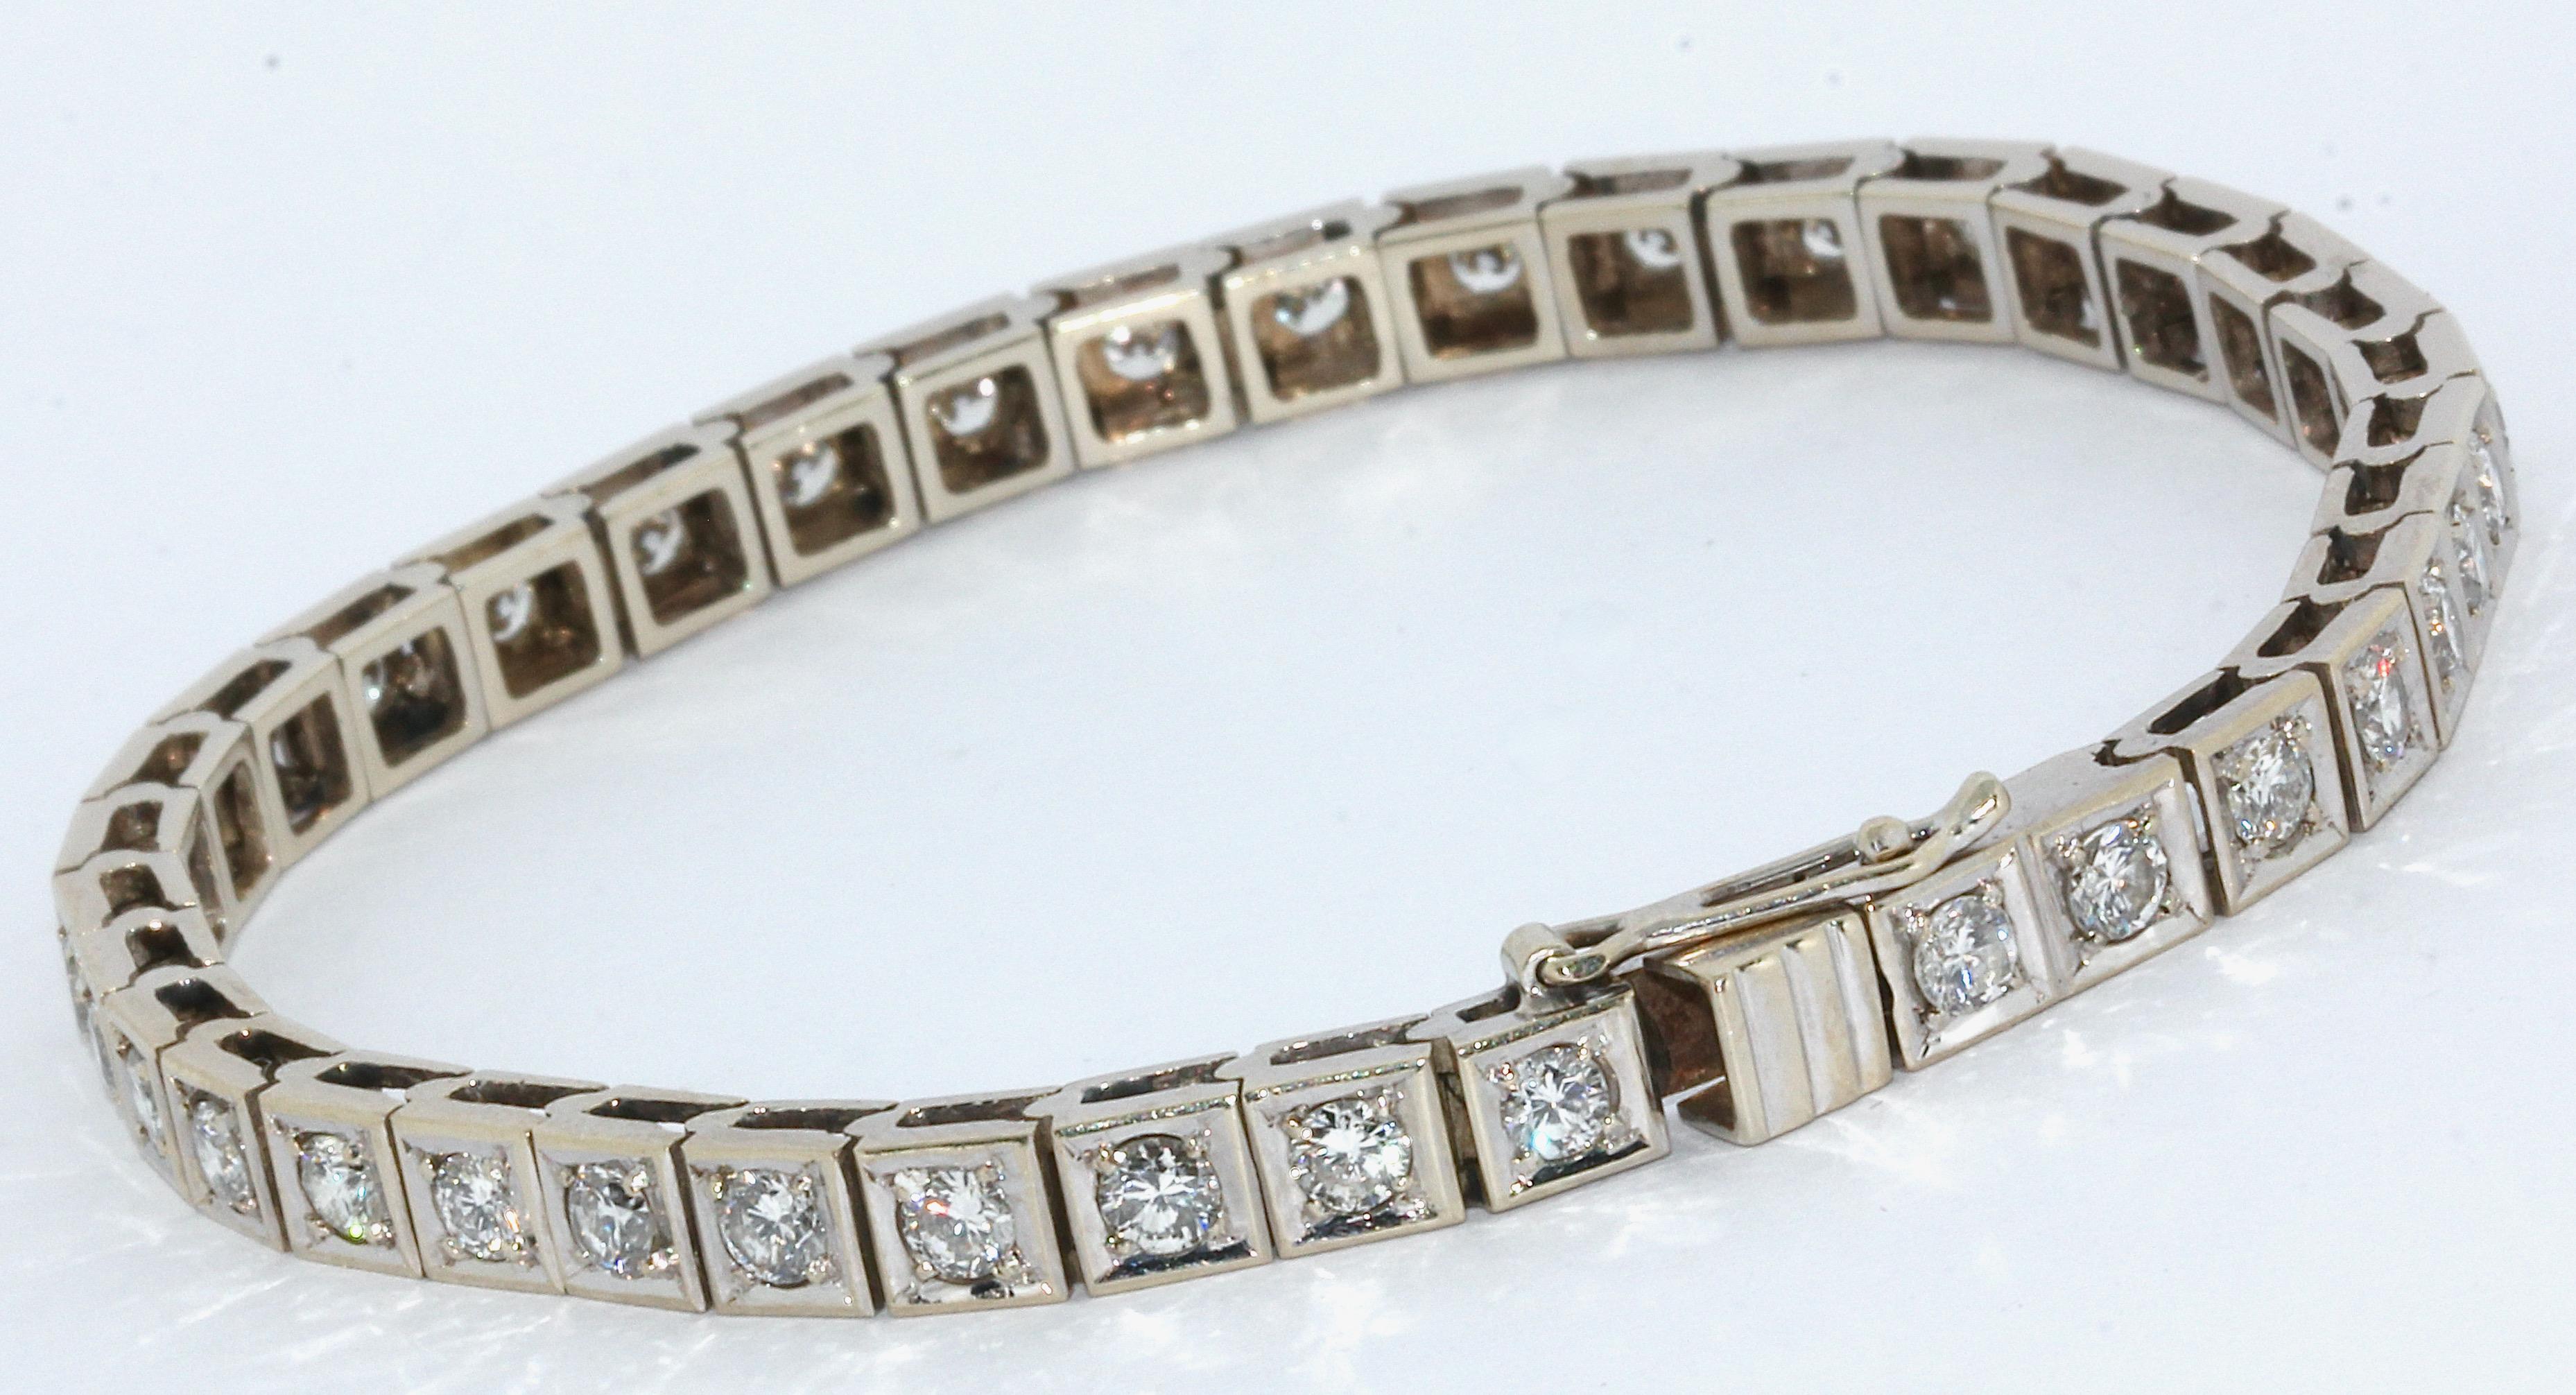 18 Karat White Gold Tennis Bracelet - set with 38 Diamonds. Total weight 3.5 to 4 Carat.

Color: Top Wesselton
Clarity: VVS - VS

Including certificate of authenticity.